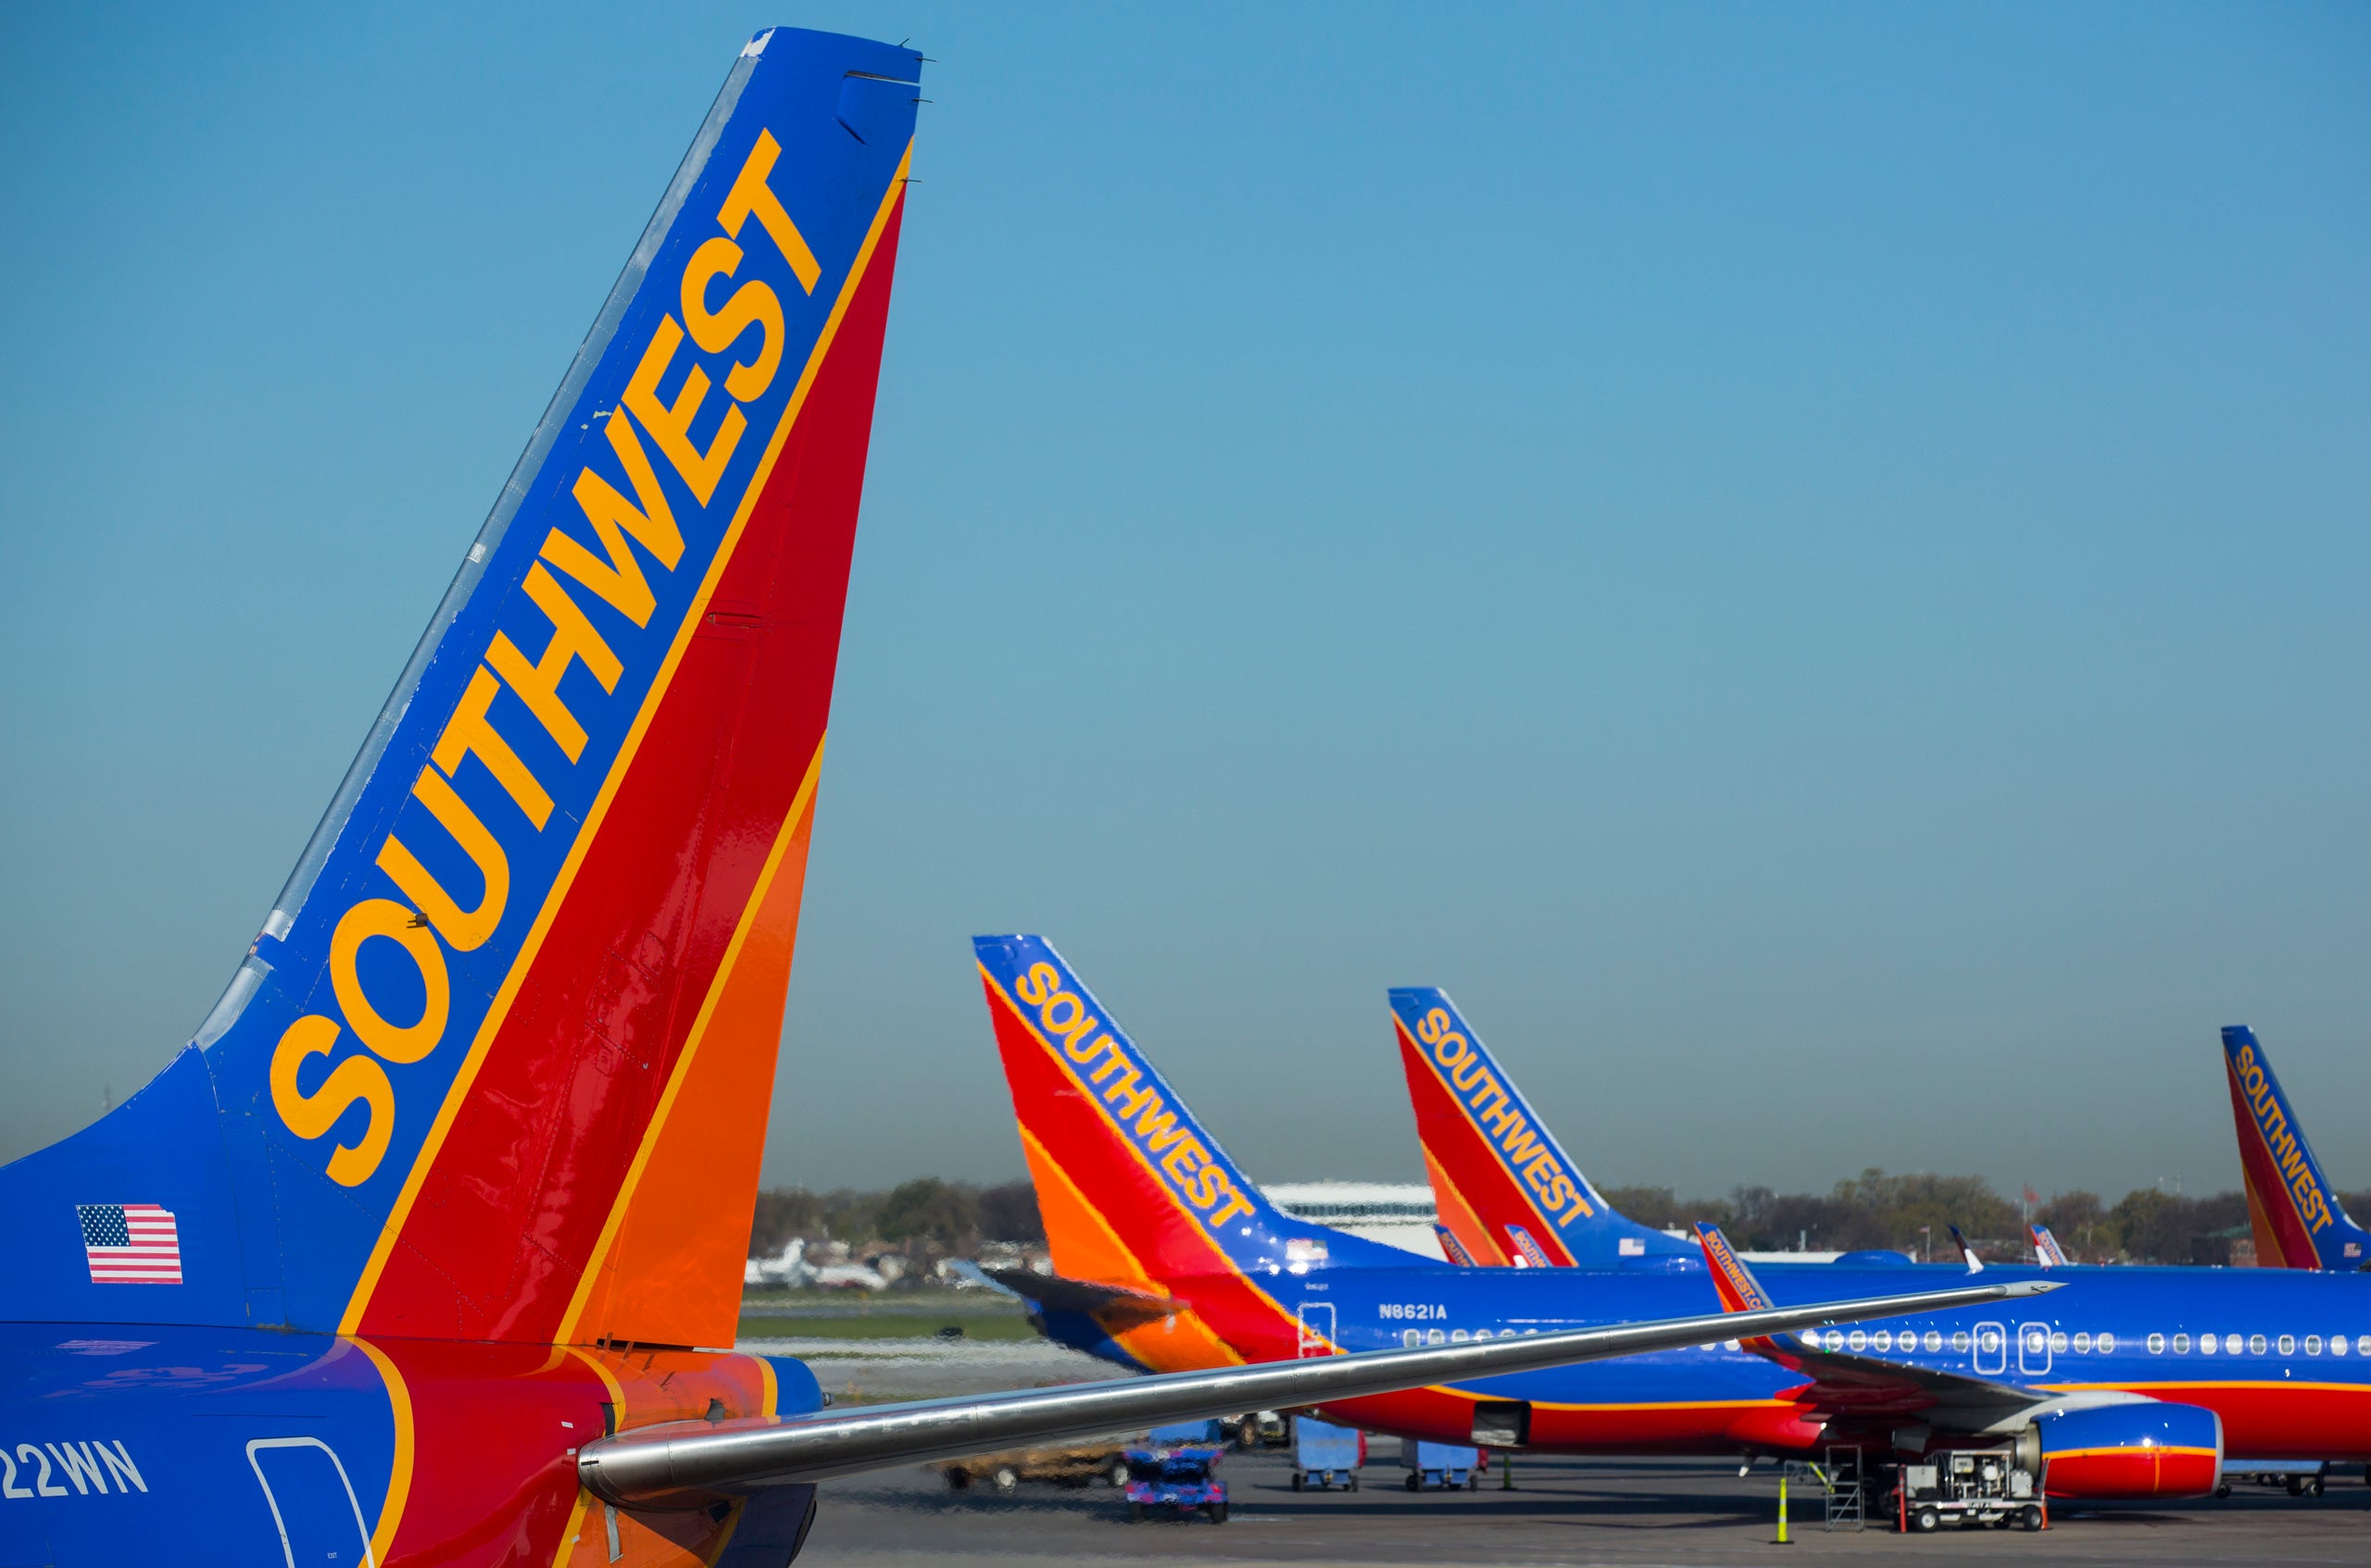 southwest airlines companion pass offer